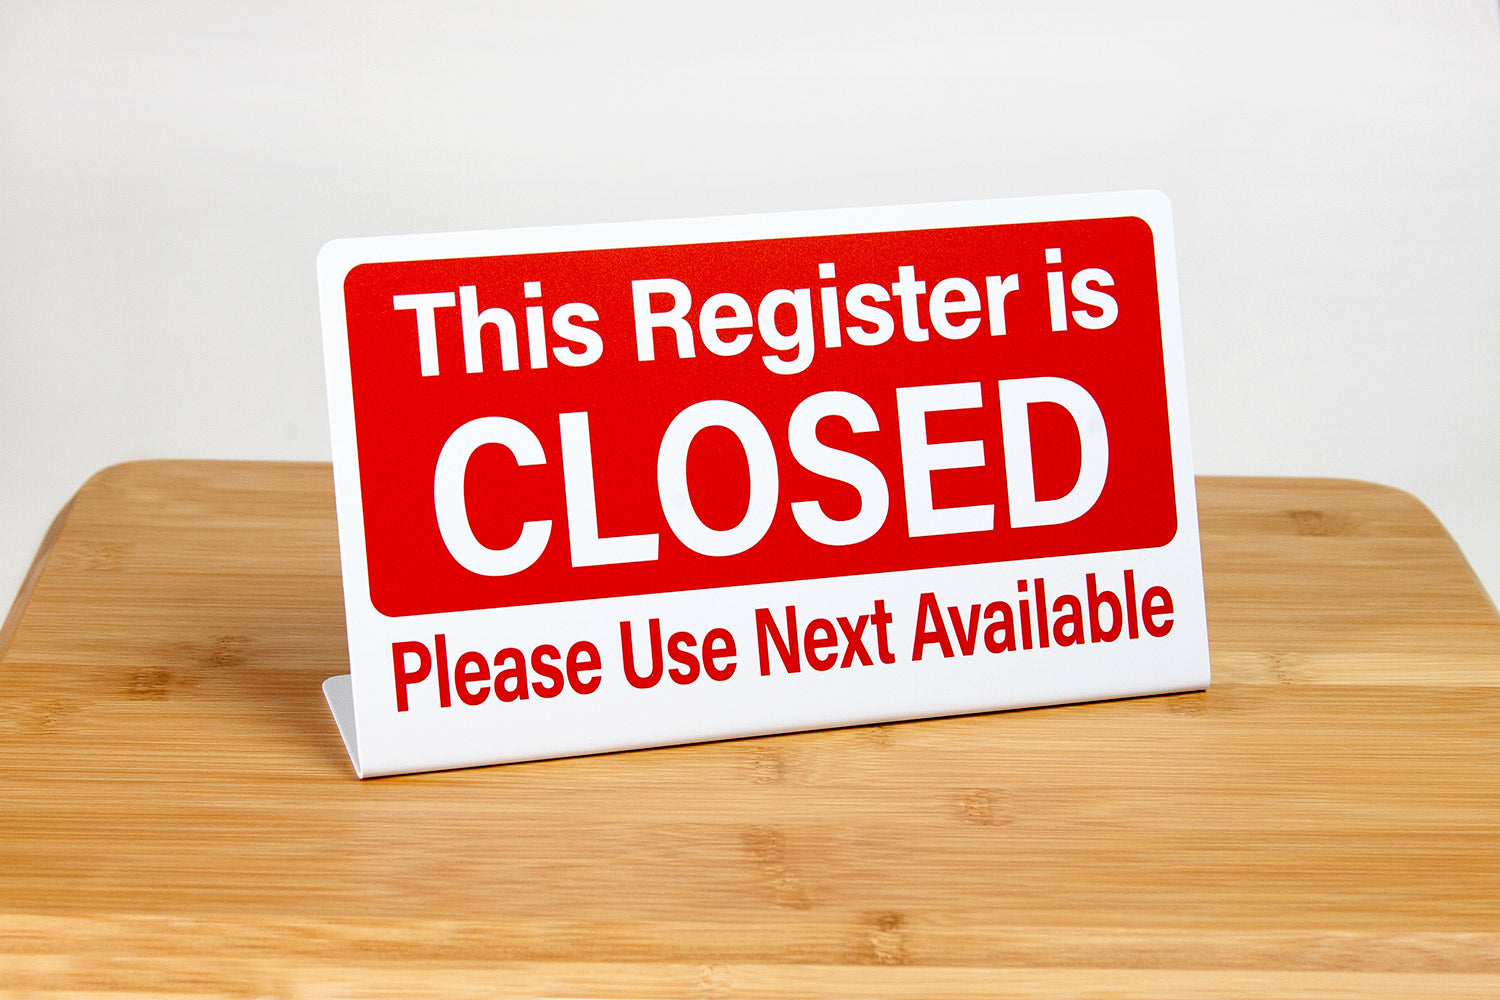 This register is closed L style signs are perfect for use in any retail setting such as grocery stores, and c-store.  These register closed signs feature a red color bar with easy to read text.